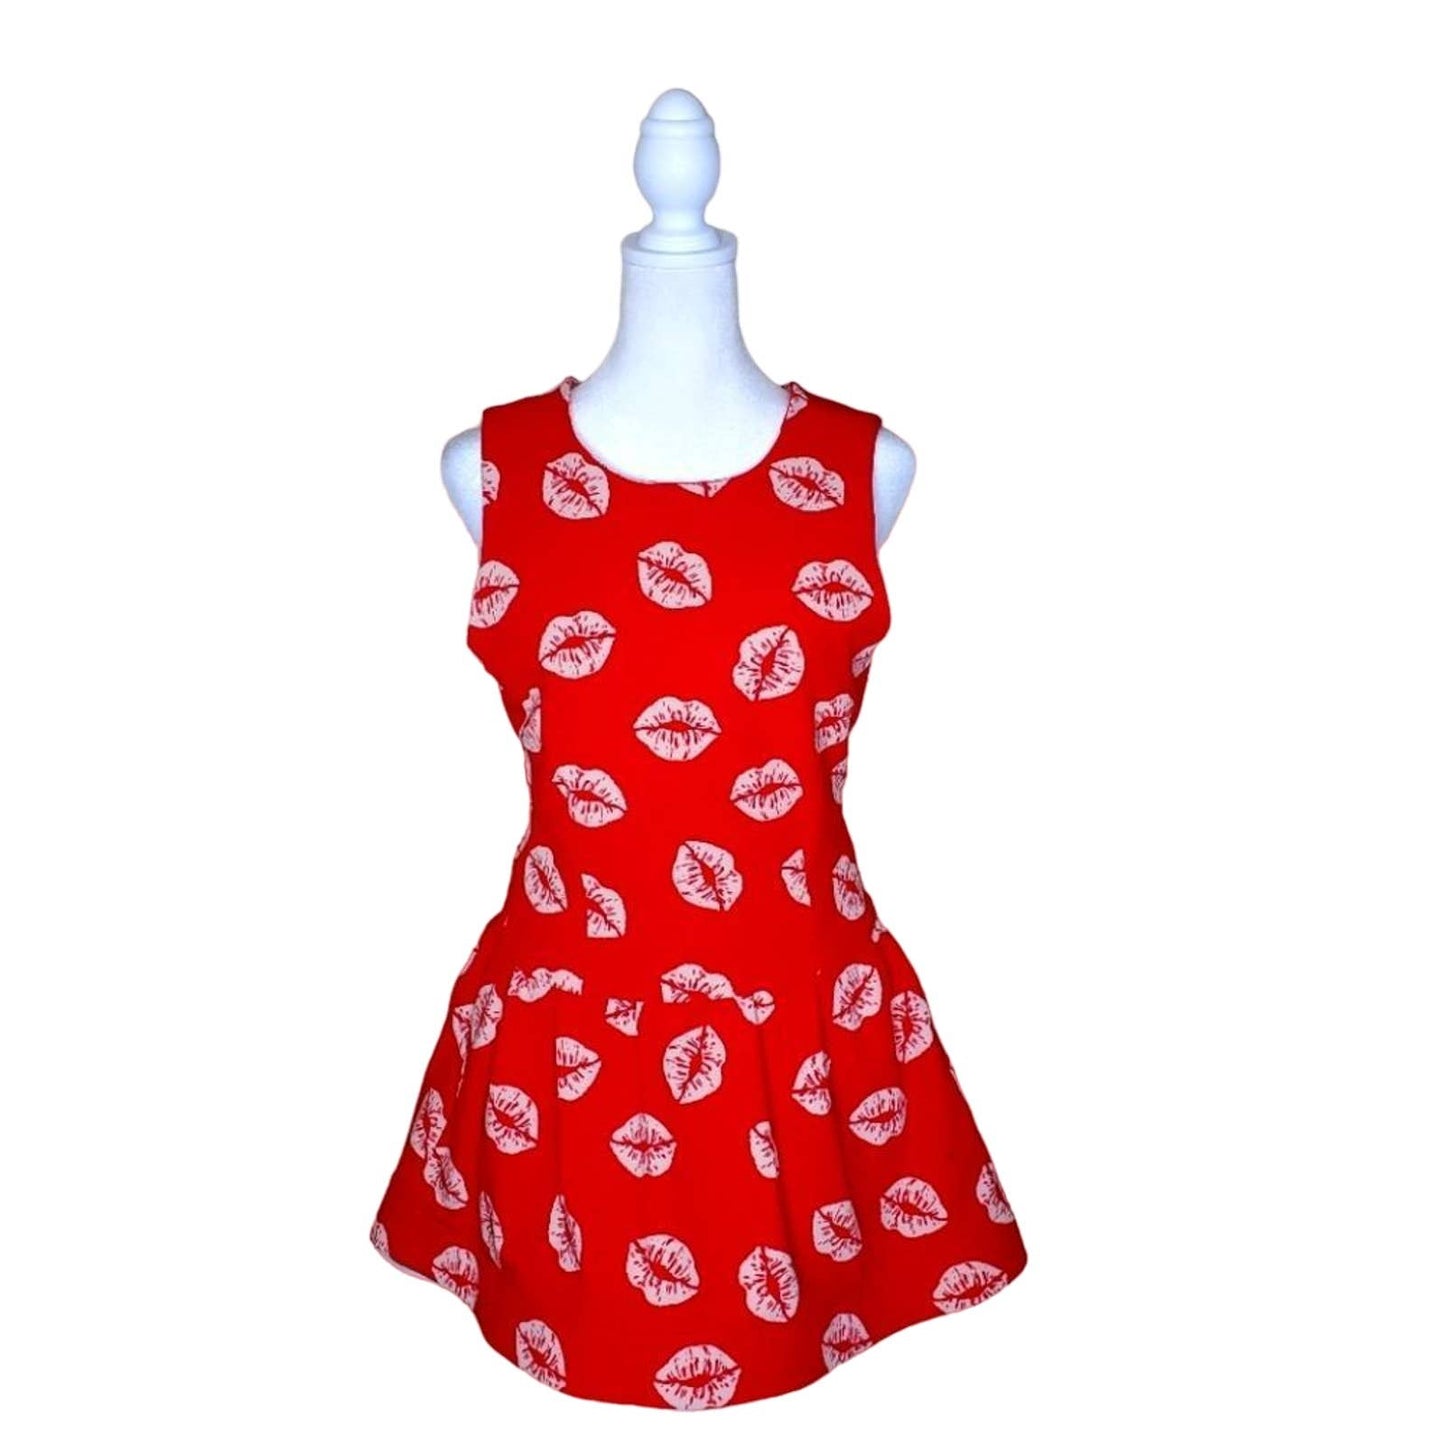 Sam Edelman Red with Cream Lips Bubble Skirt Set, Small Size 2